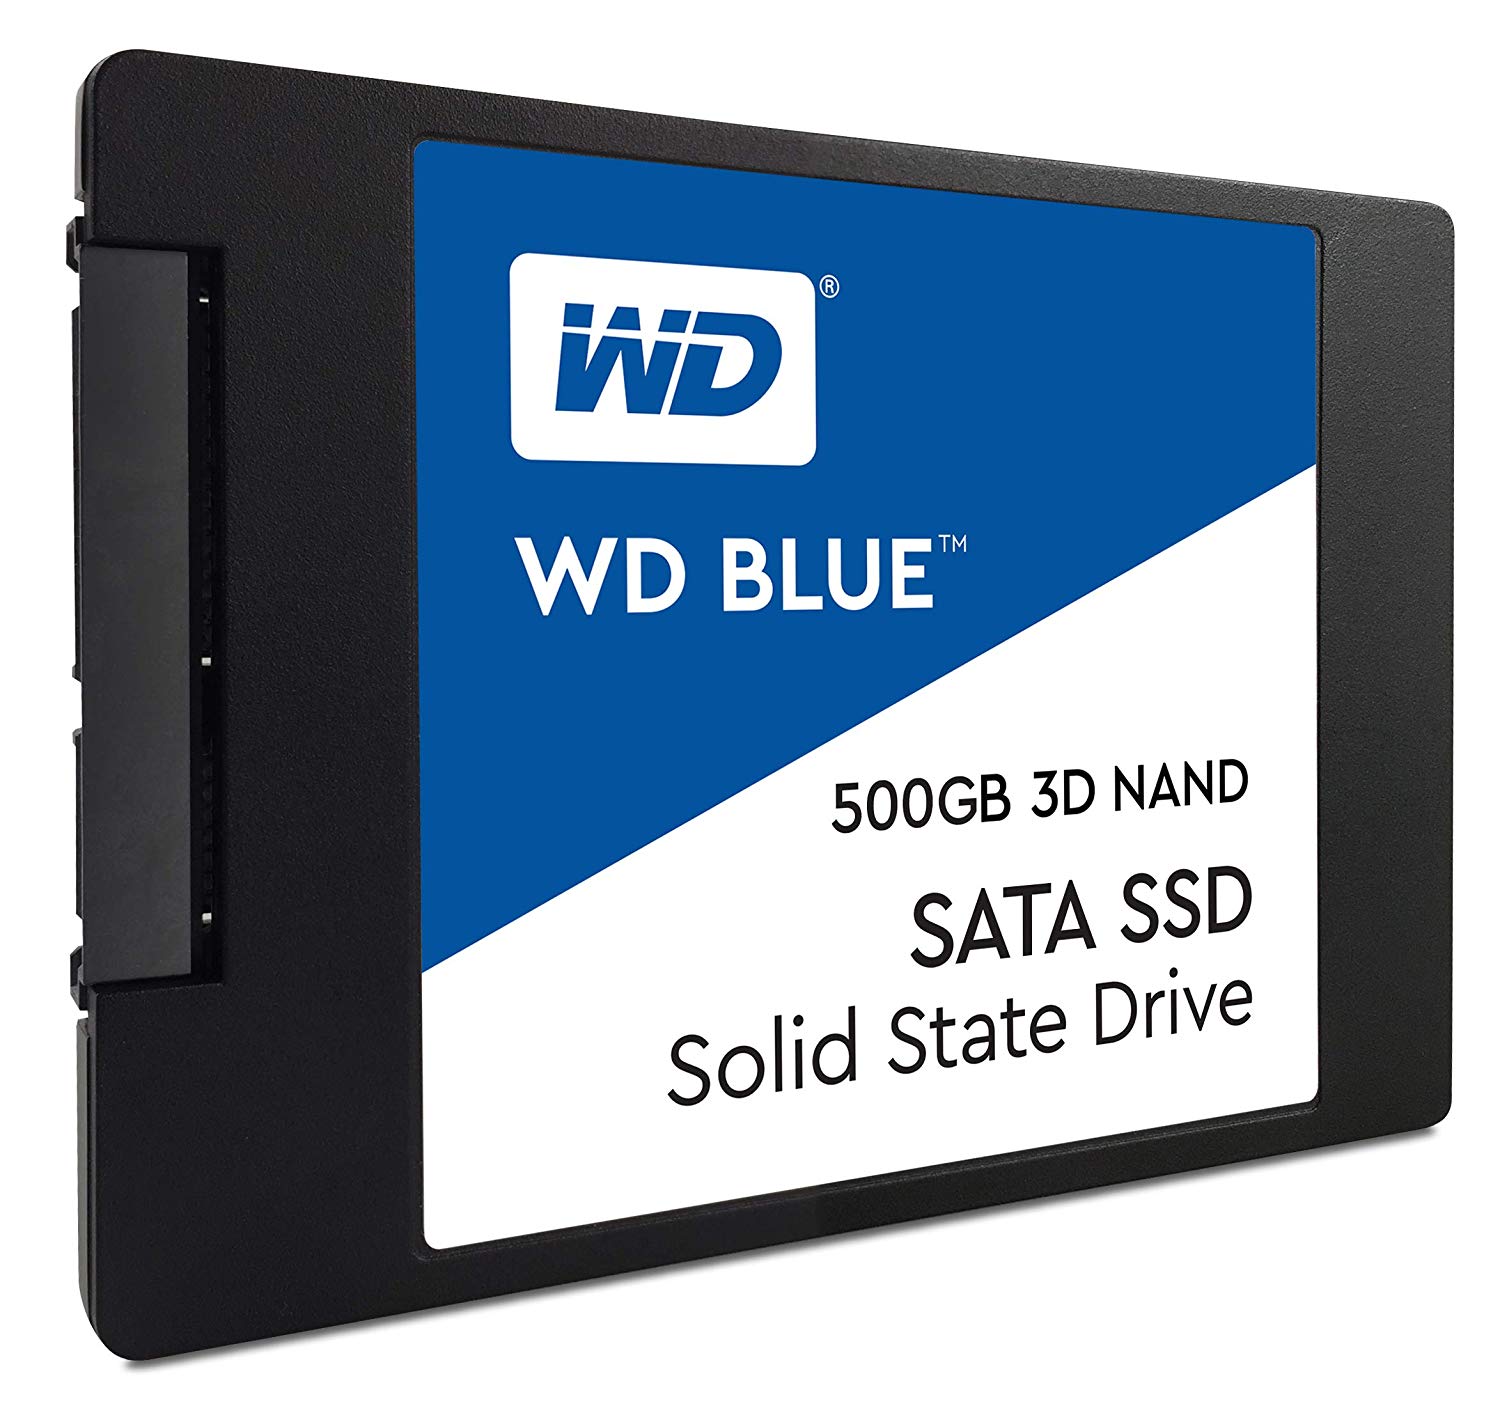 How To Use A 500GB Solid State Drive